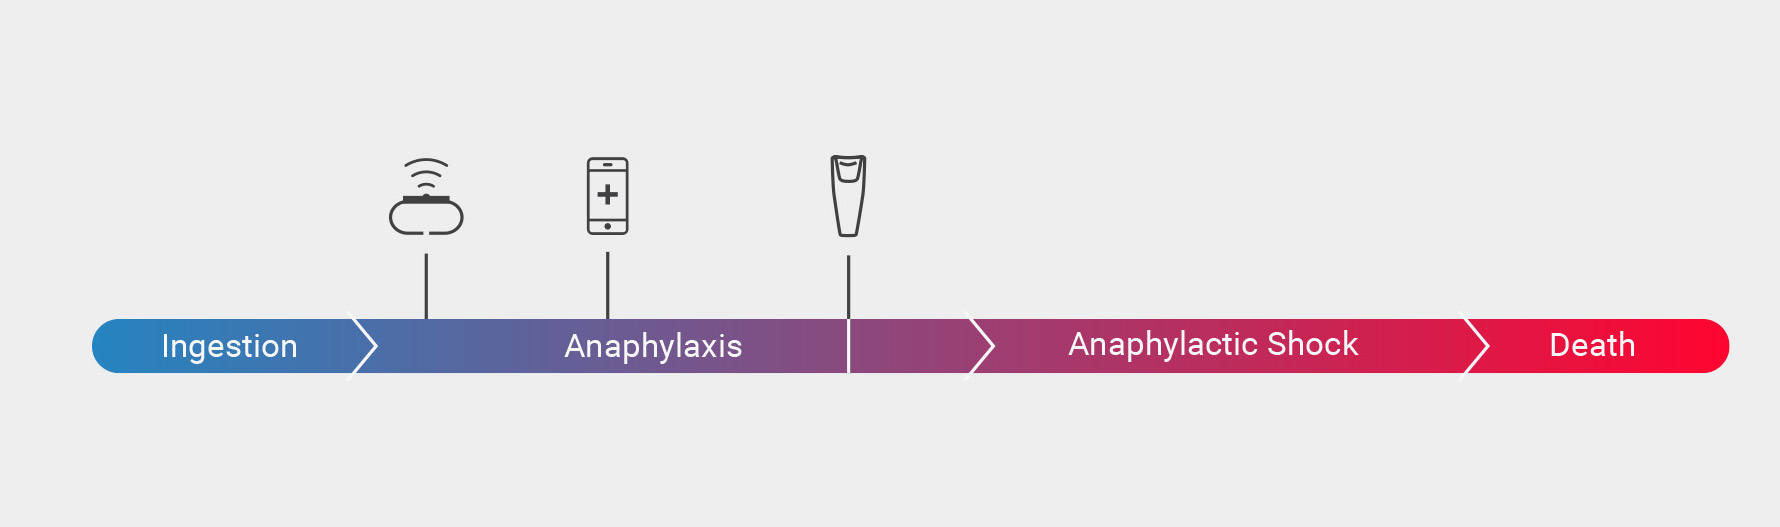 Anaphylaxis Stages from Mild to Severe